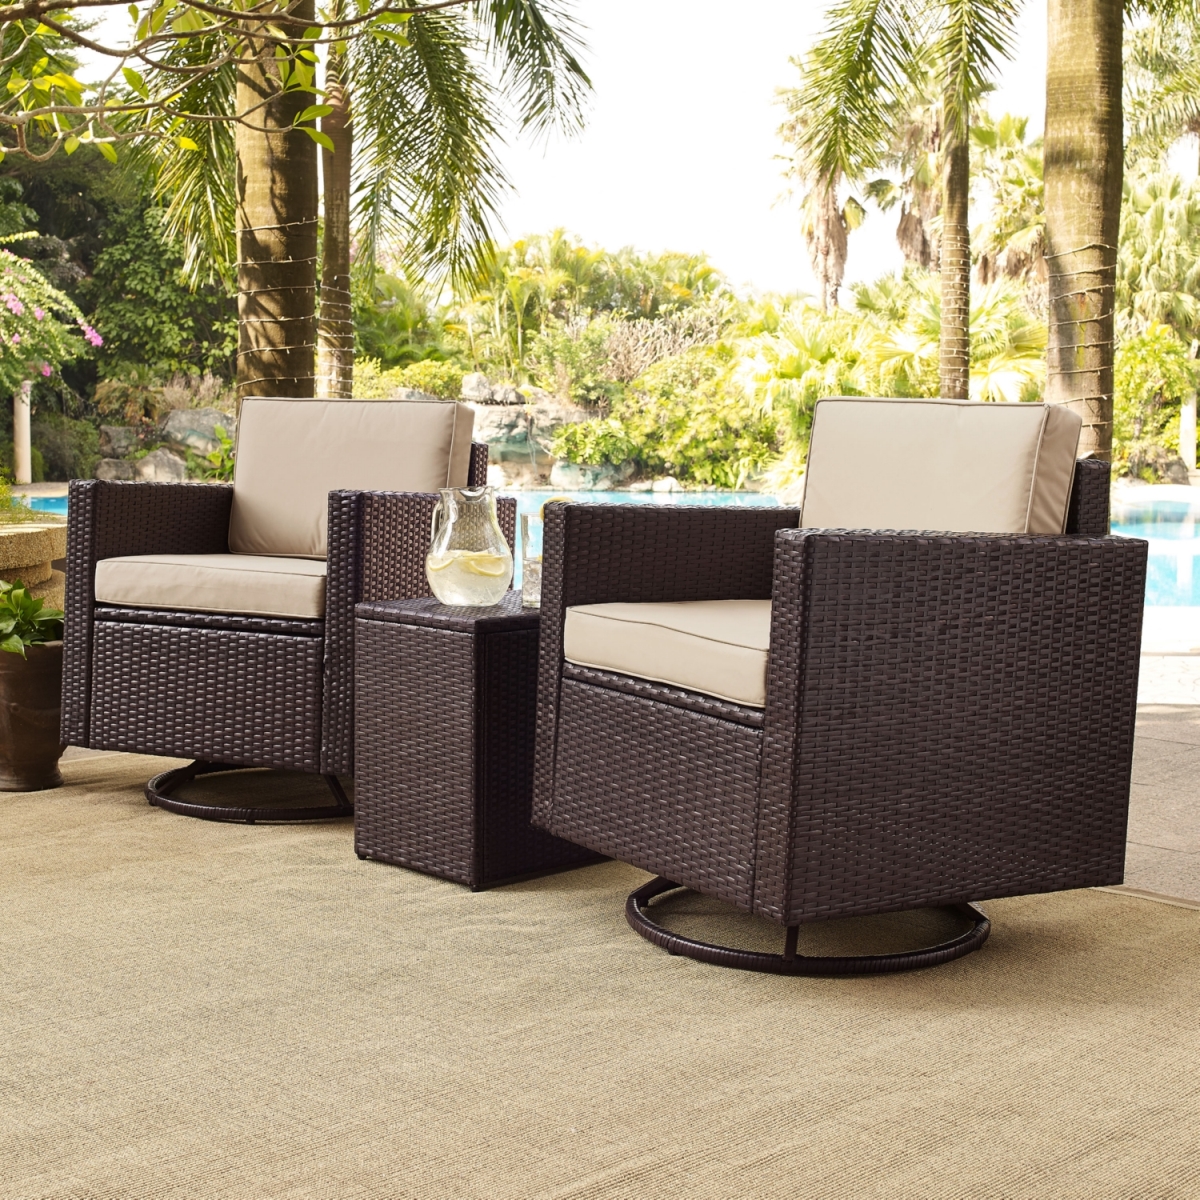 3-piece Palm Harbor Outdoor Wicker Conversation Set With Sand Cushions, Two Swivel Chairs & Side Table